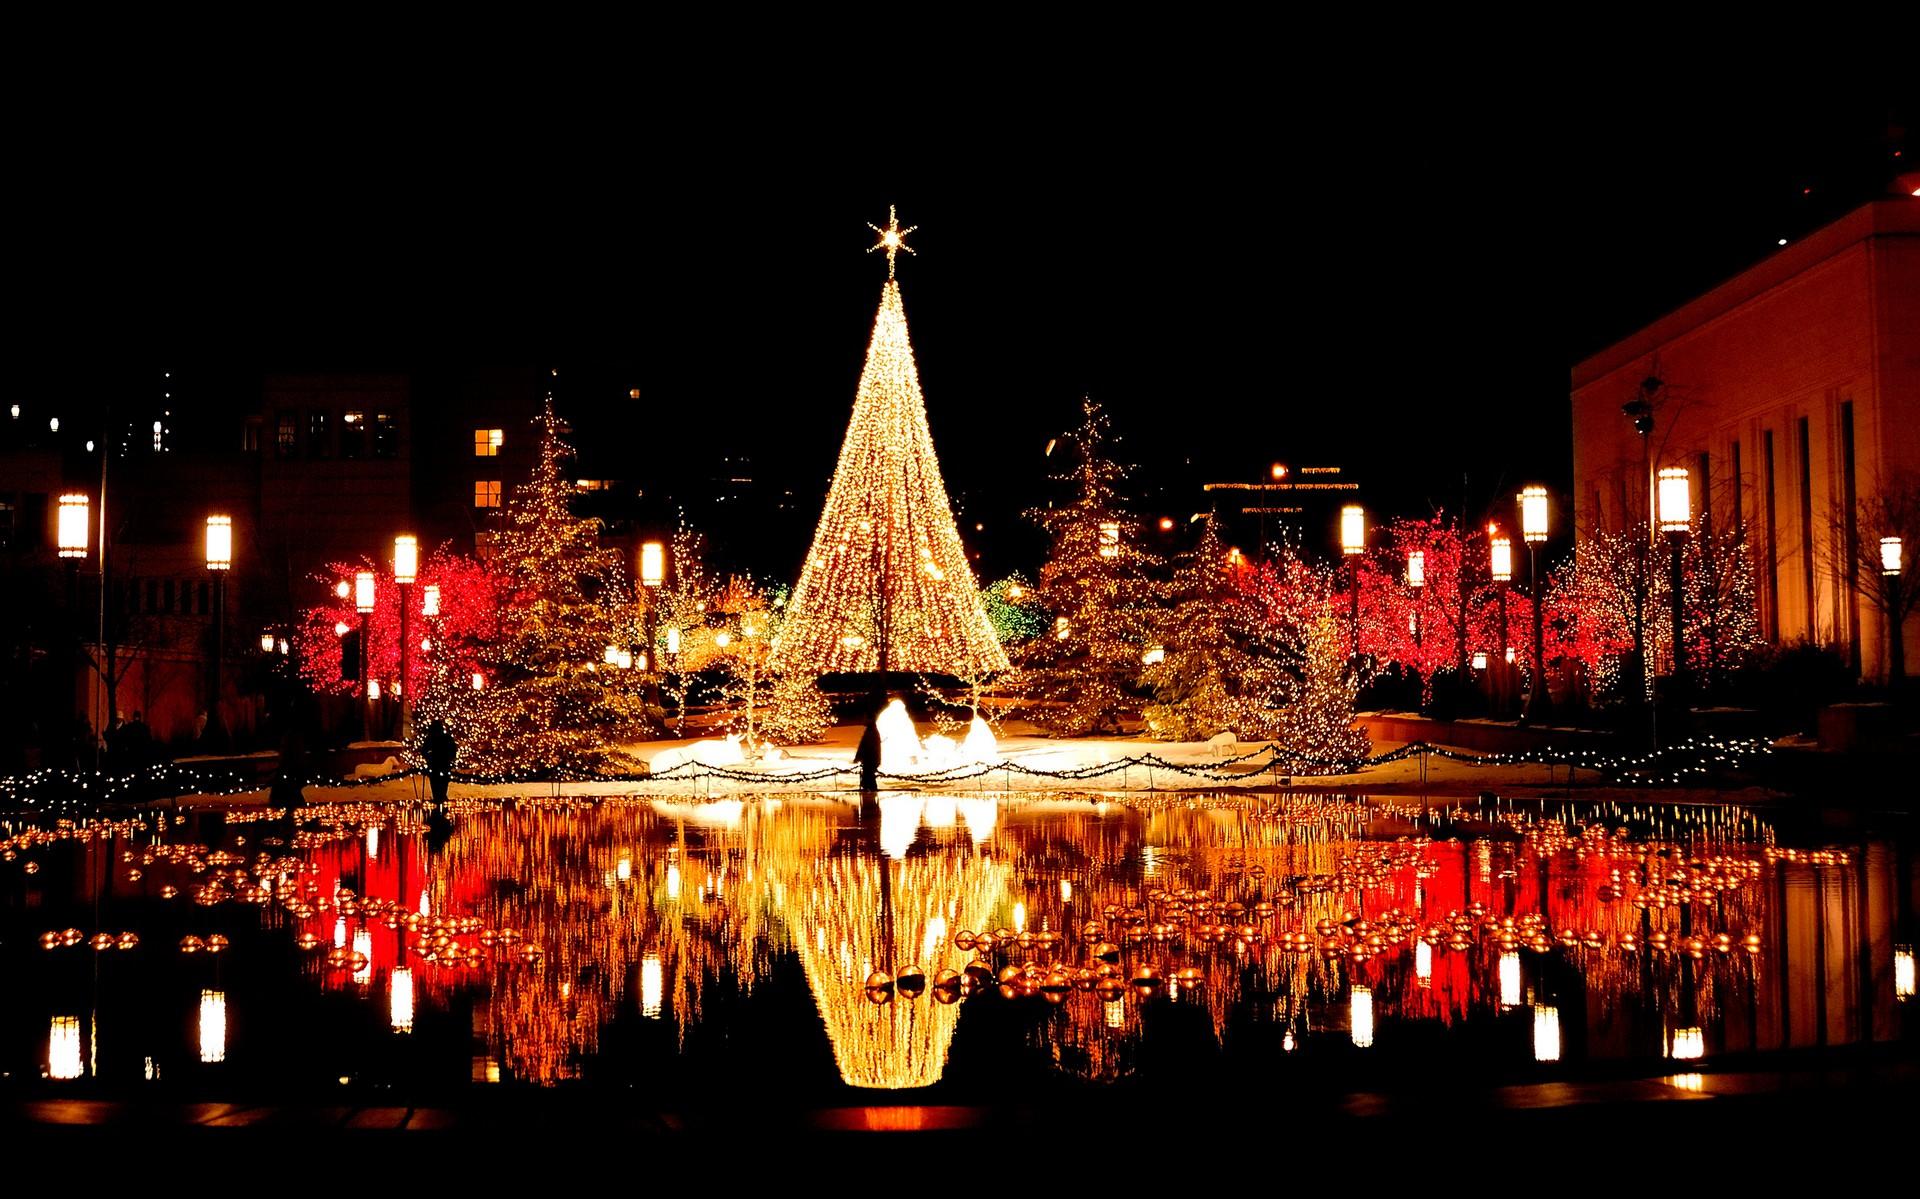 Wonderful Christmas Decorations In The City By Night Mirror